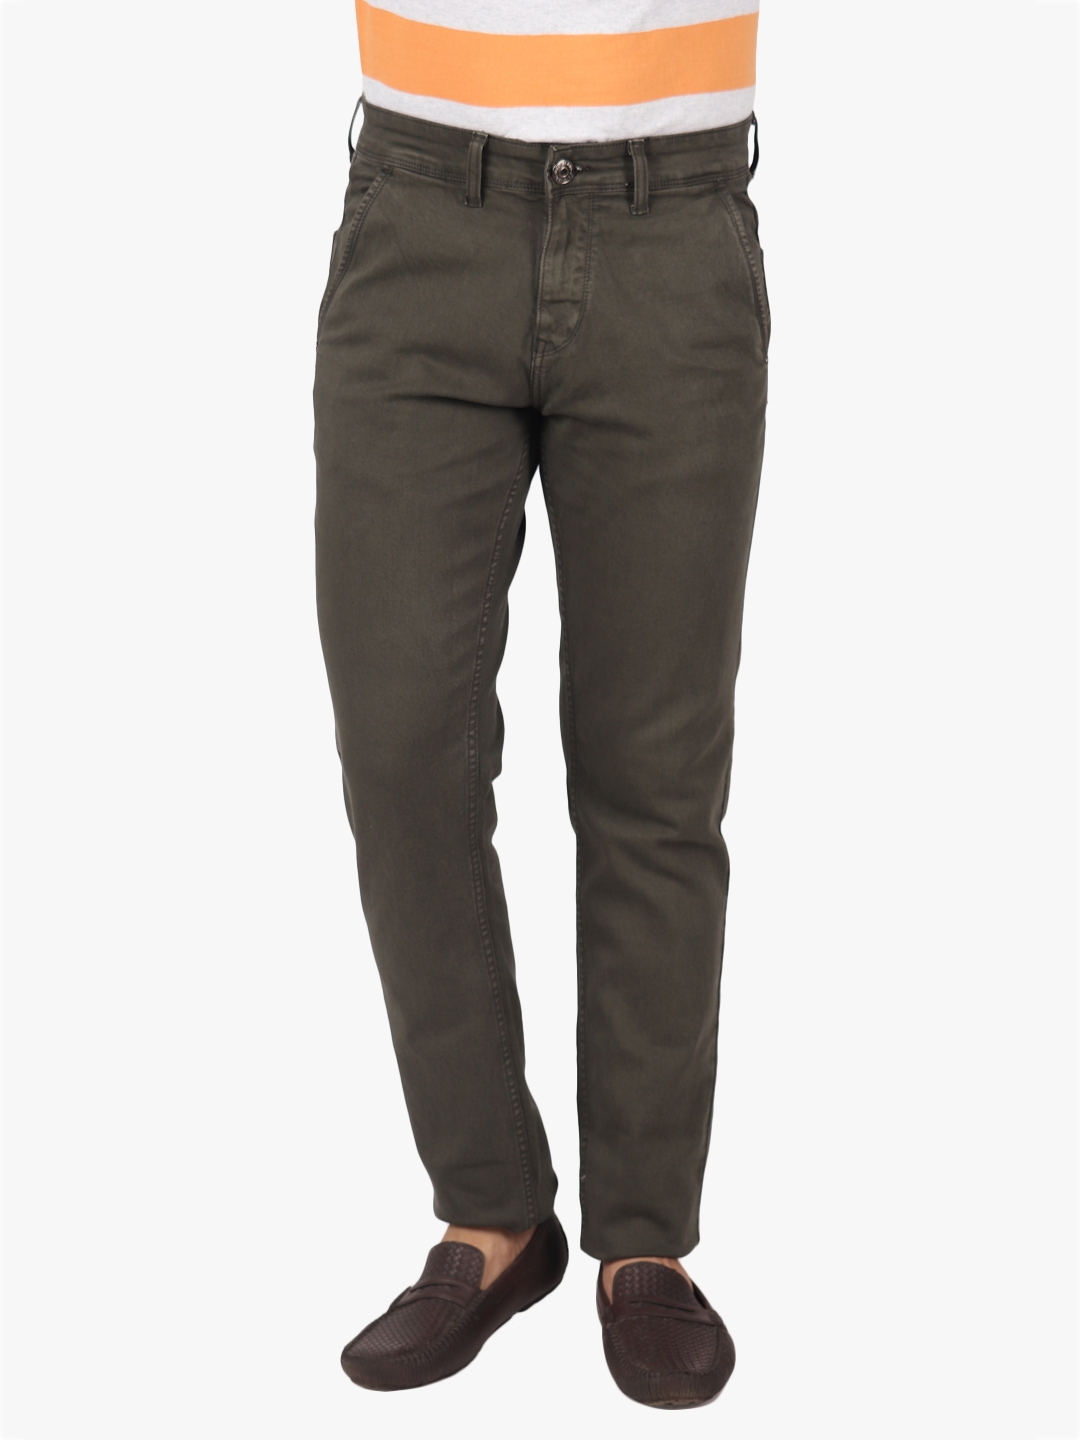 D'cot by Donear | D'cot by Donear Mens Green Cotton Jeans